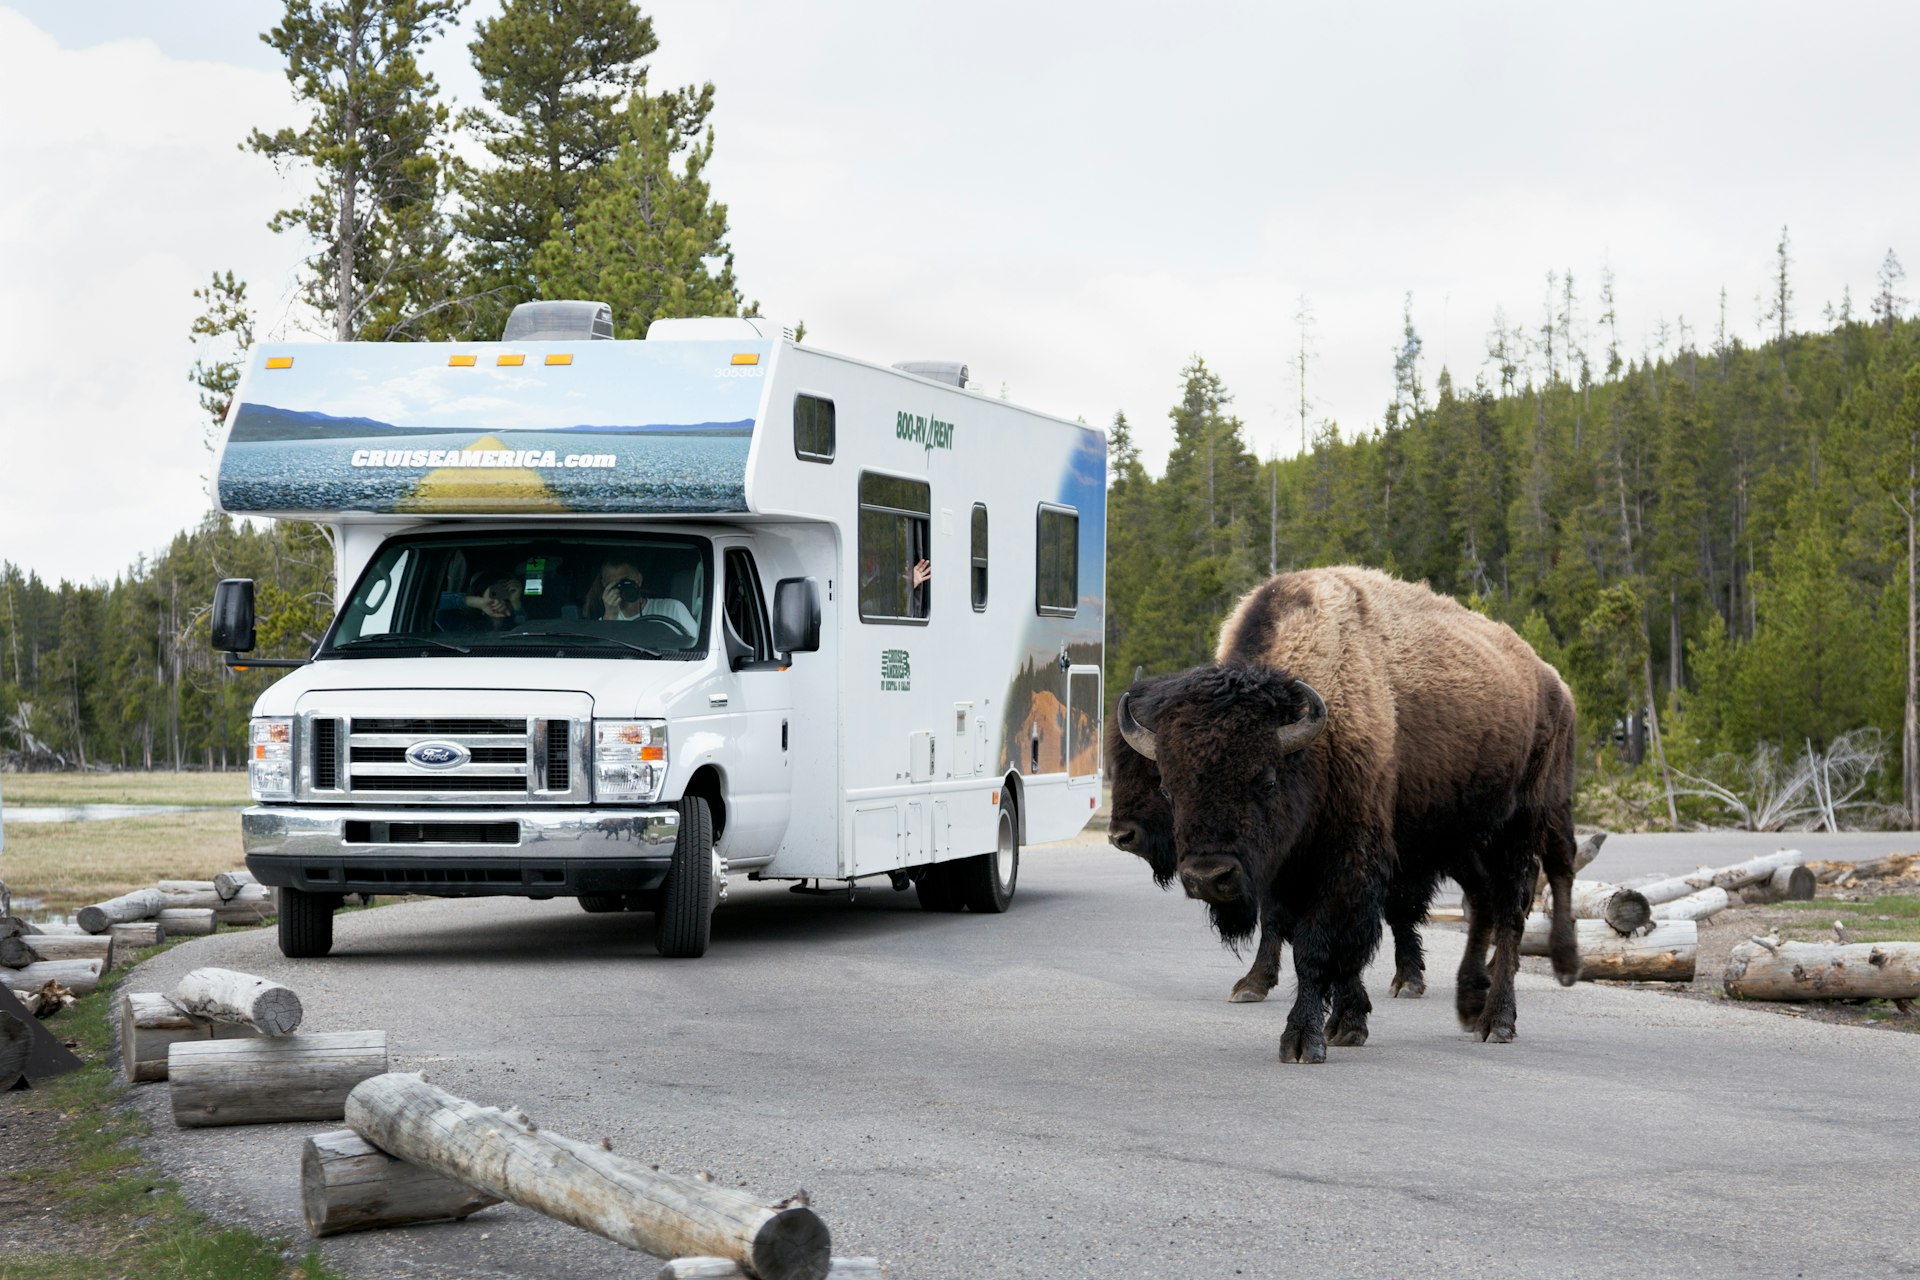 Two American Bison walk in front of a motorhome in Yellowstone National Park, Wyoming